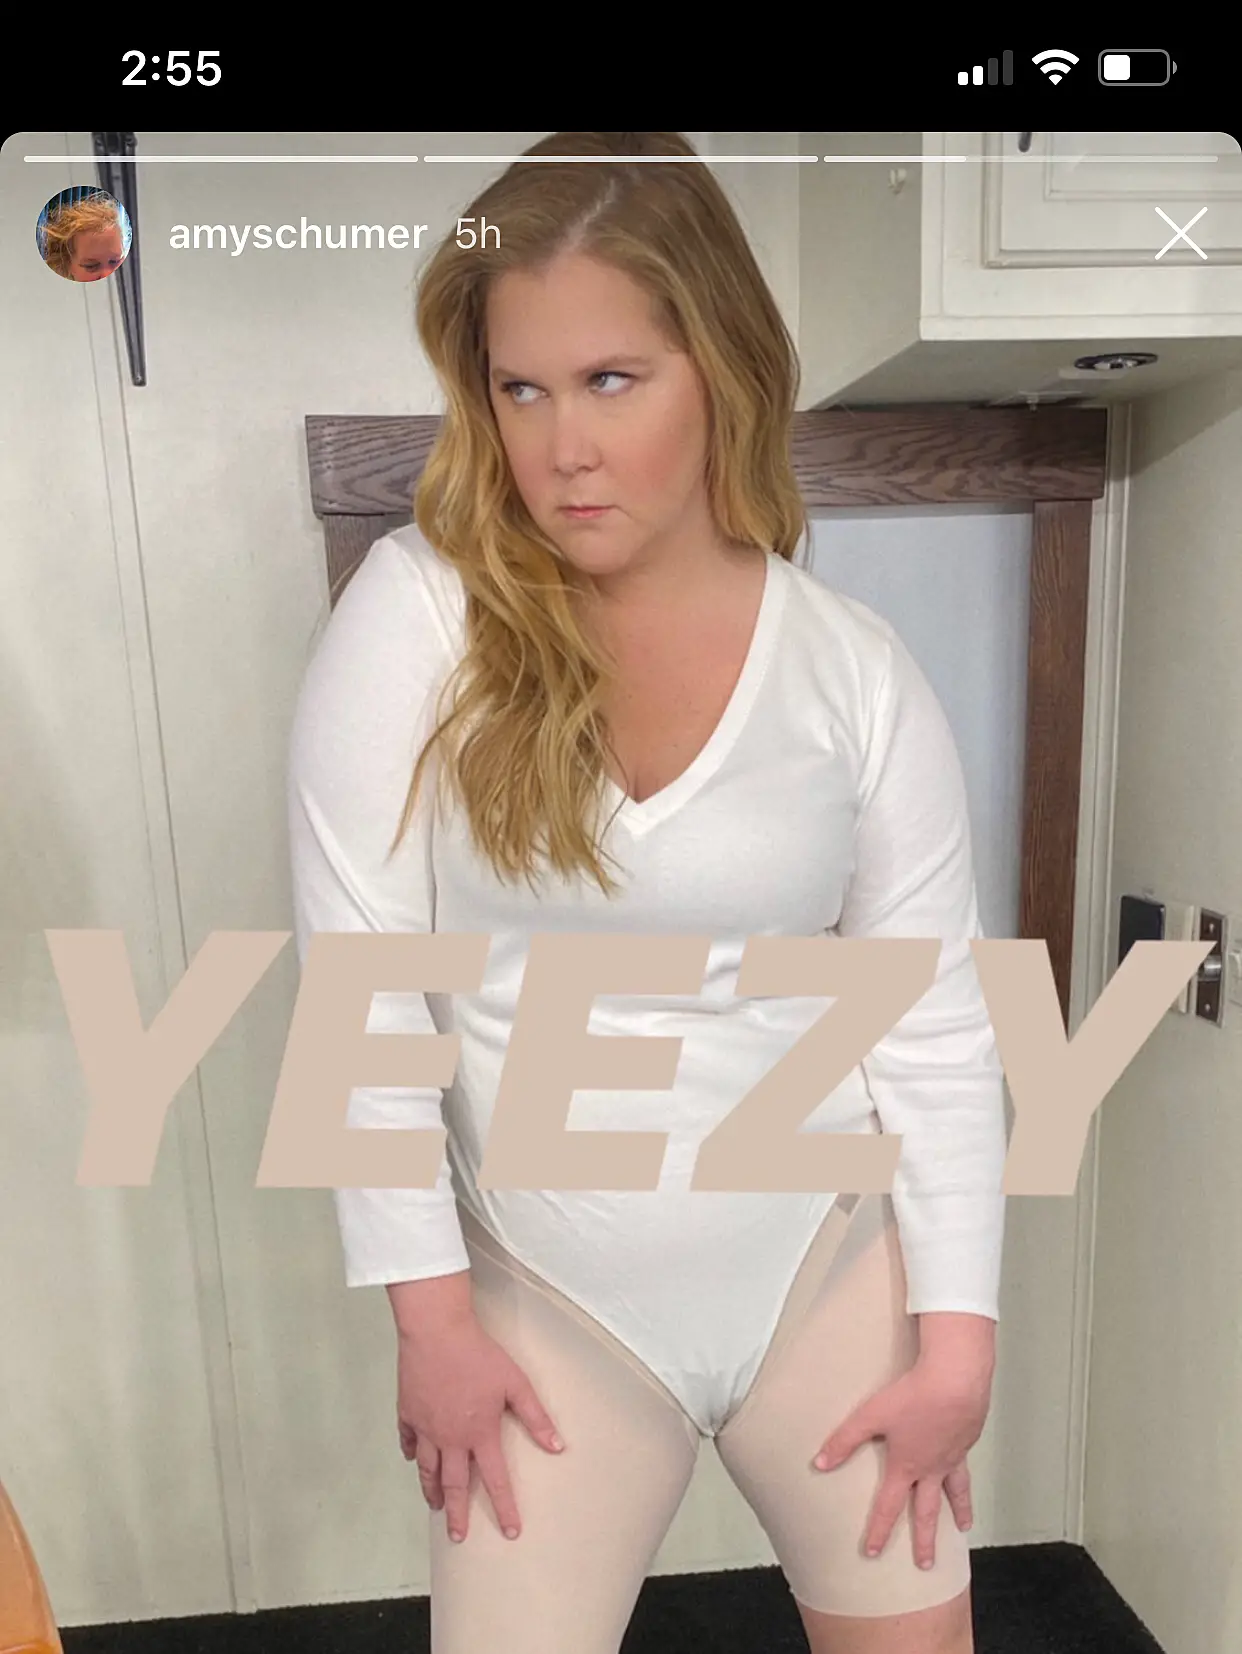 Amy Schumer supporting the brand